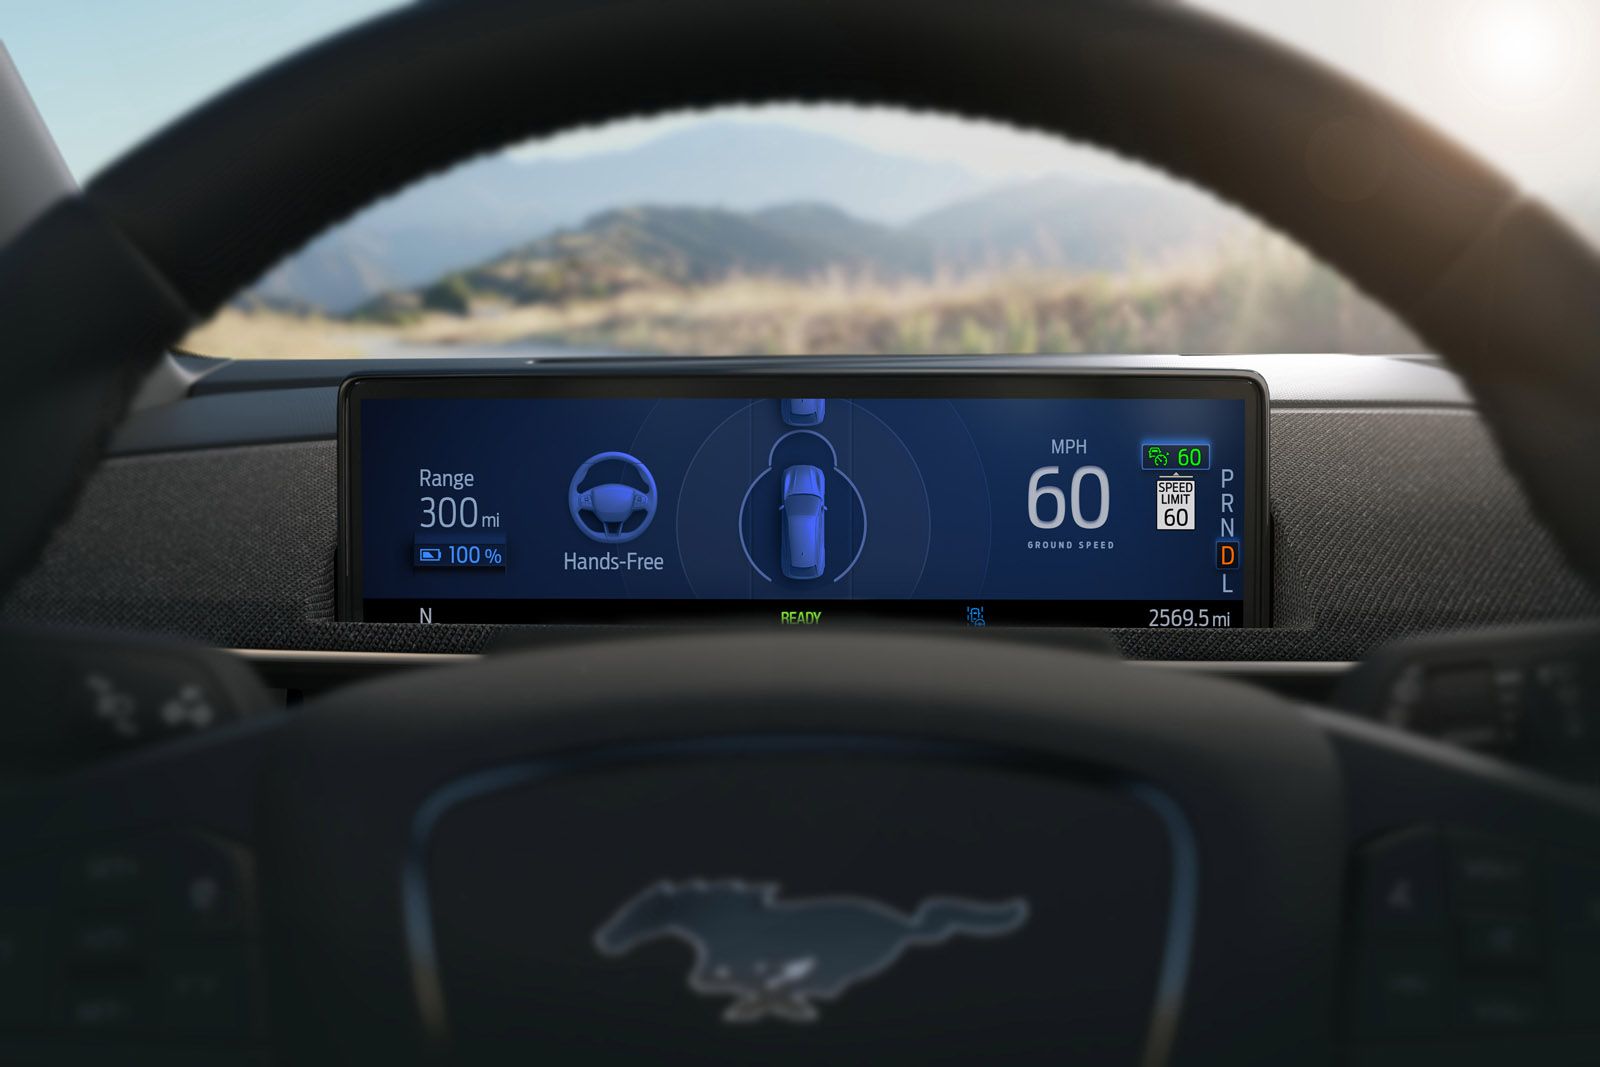 Fords reveals details of the Mustang Mach-Es hand-free driving system image 2